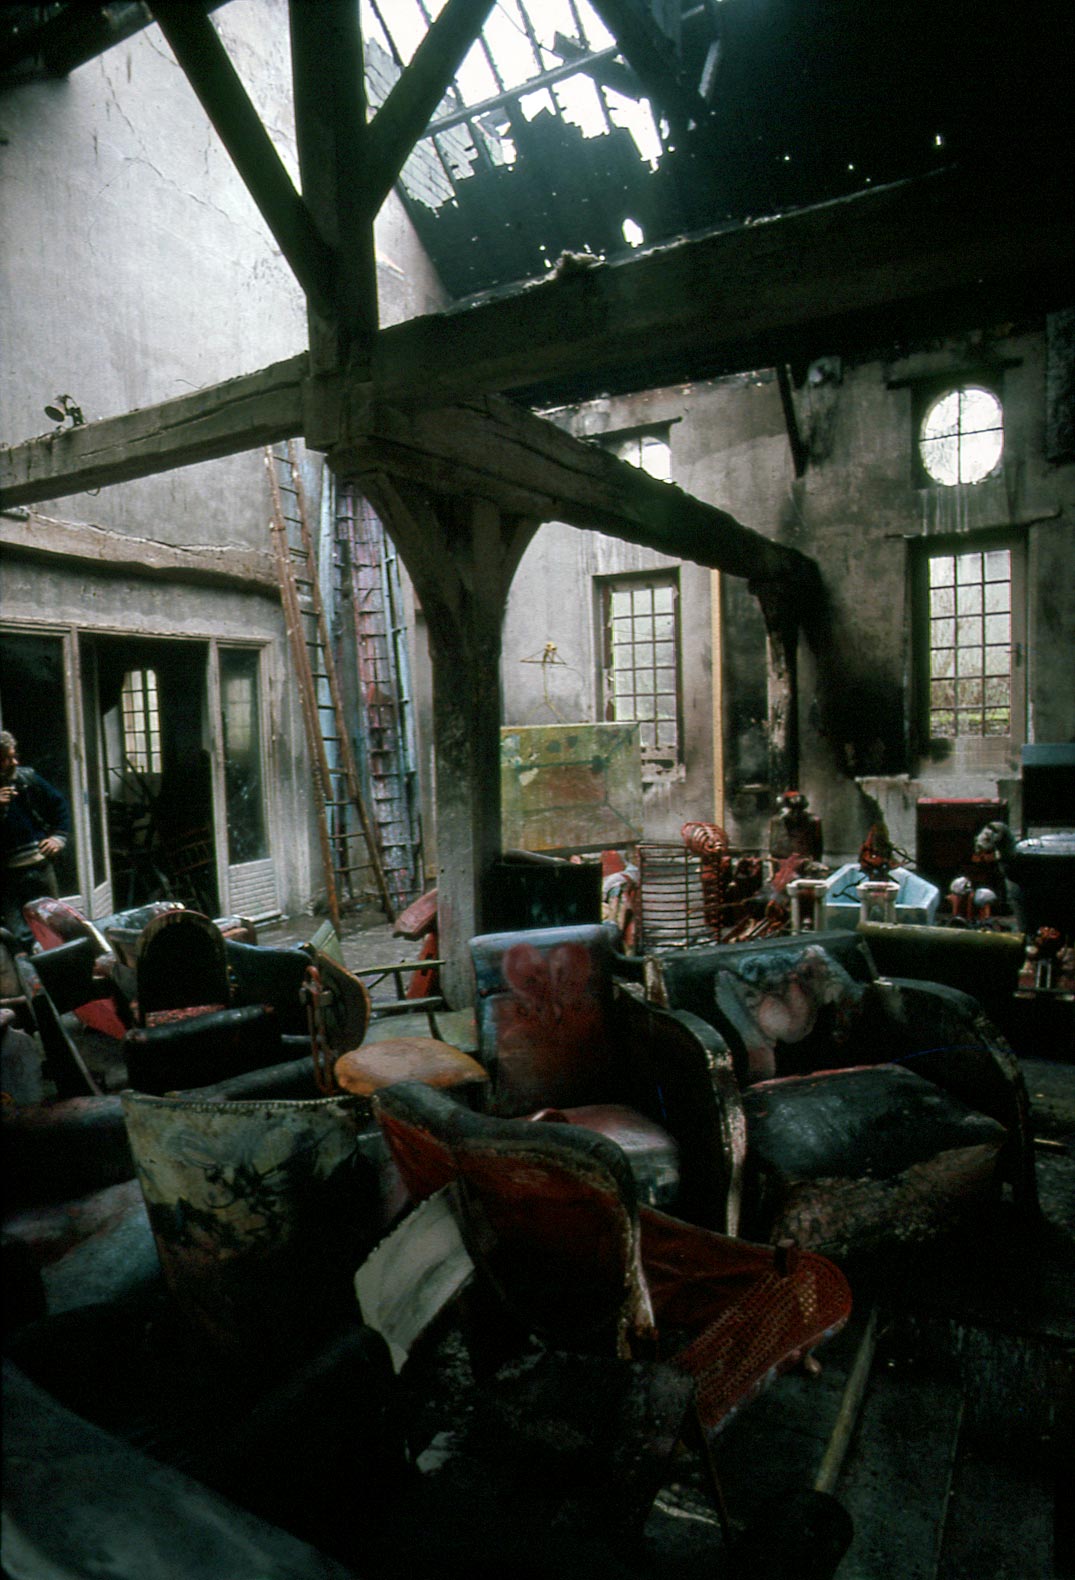 Dado’s studio after the fire in 1988